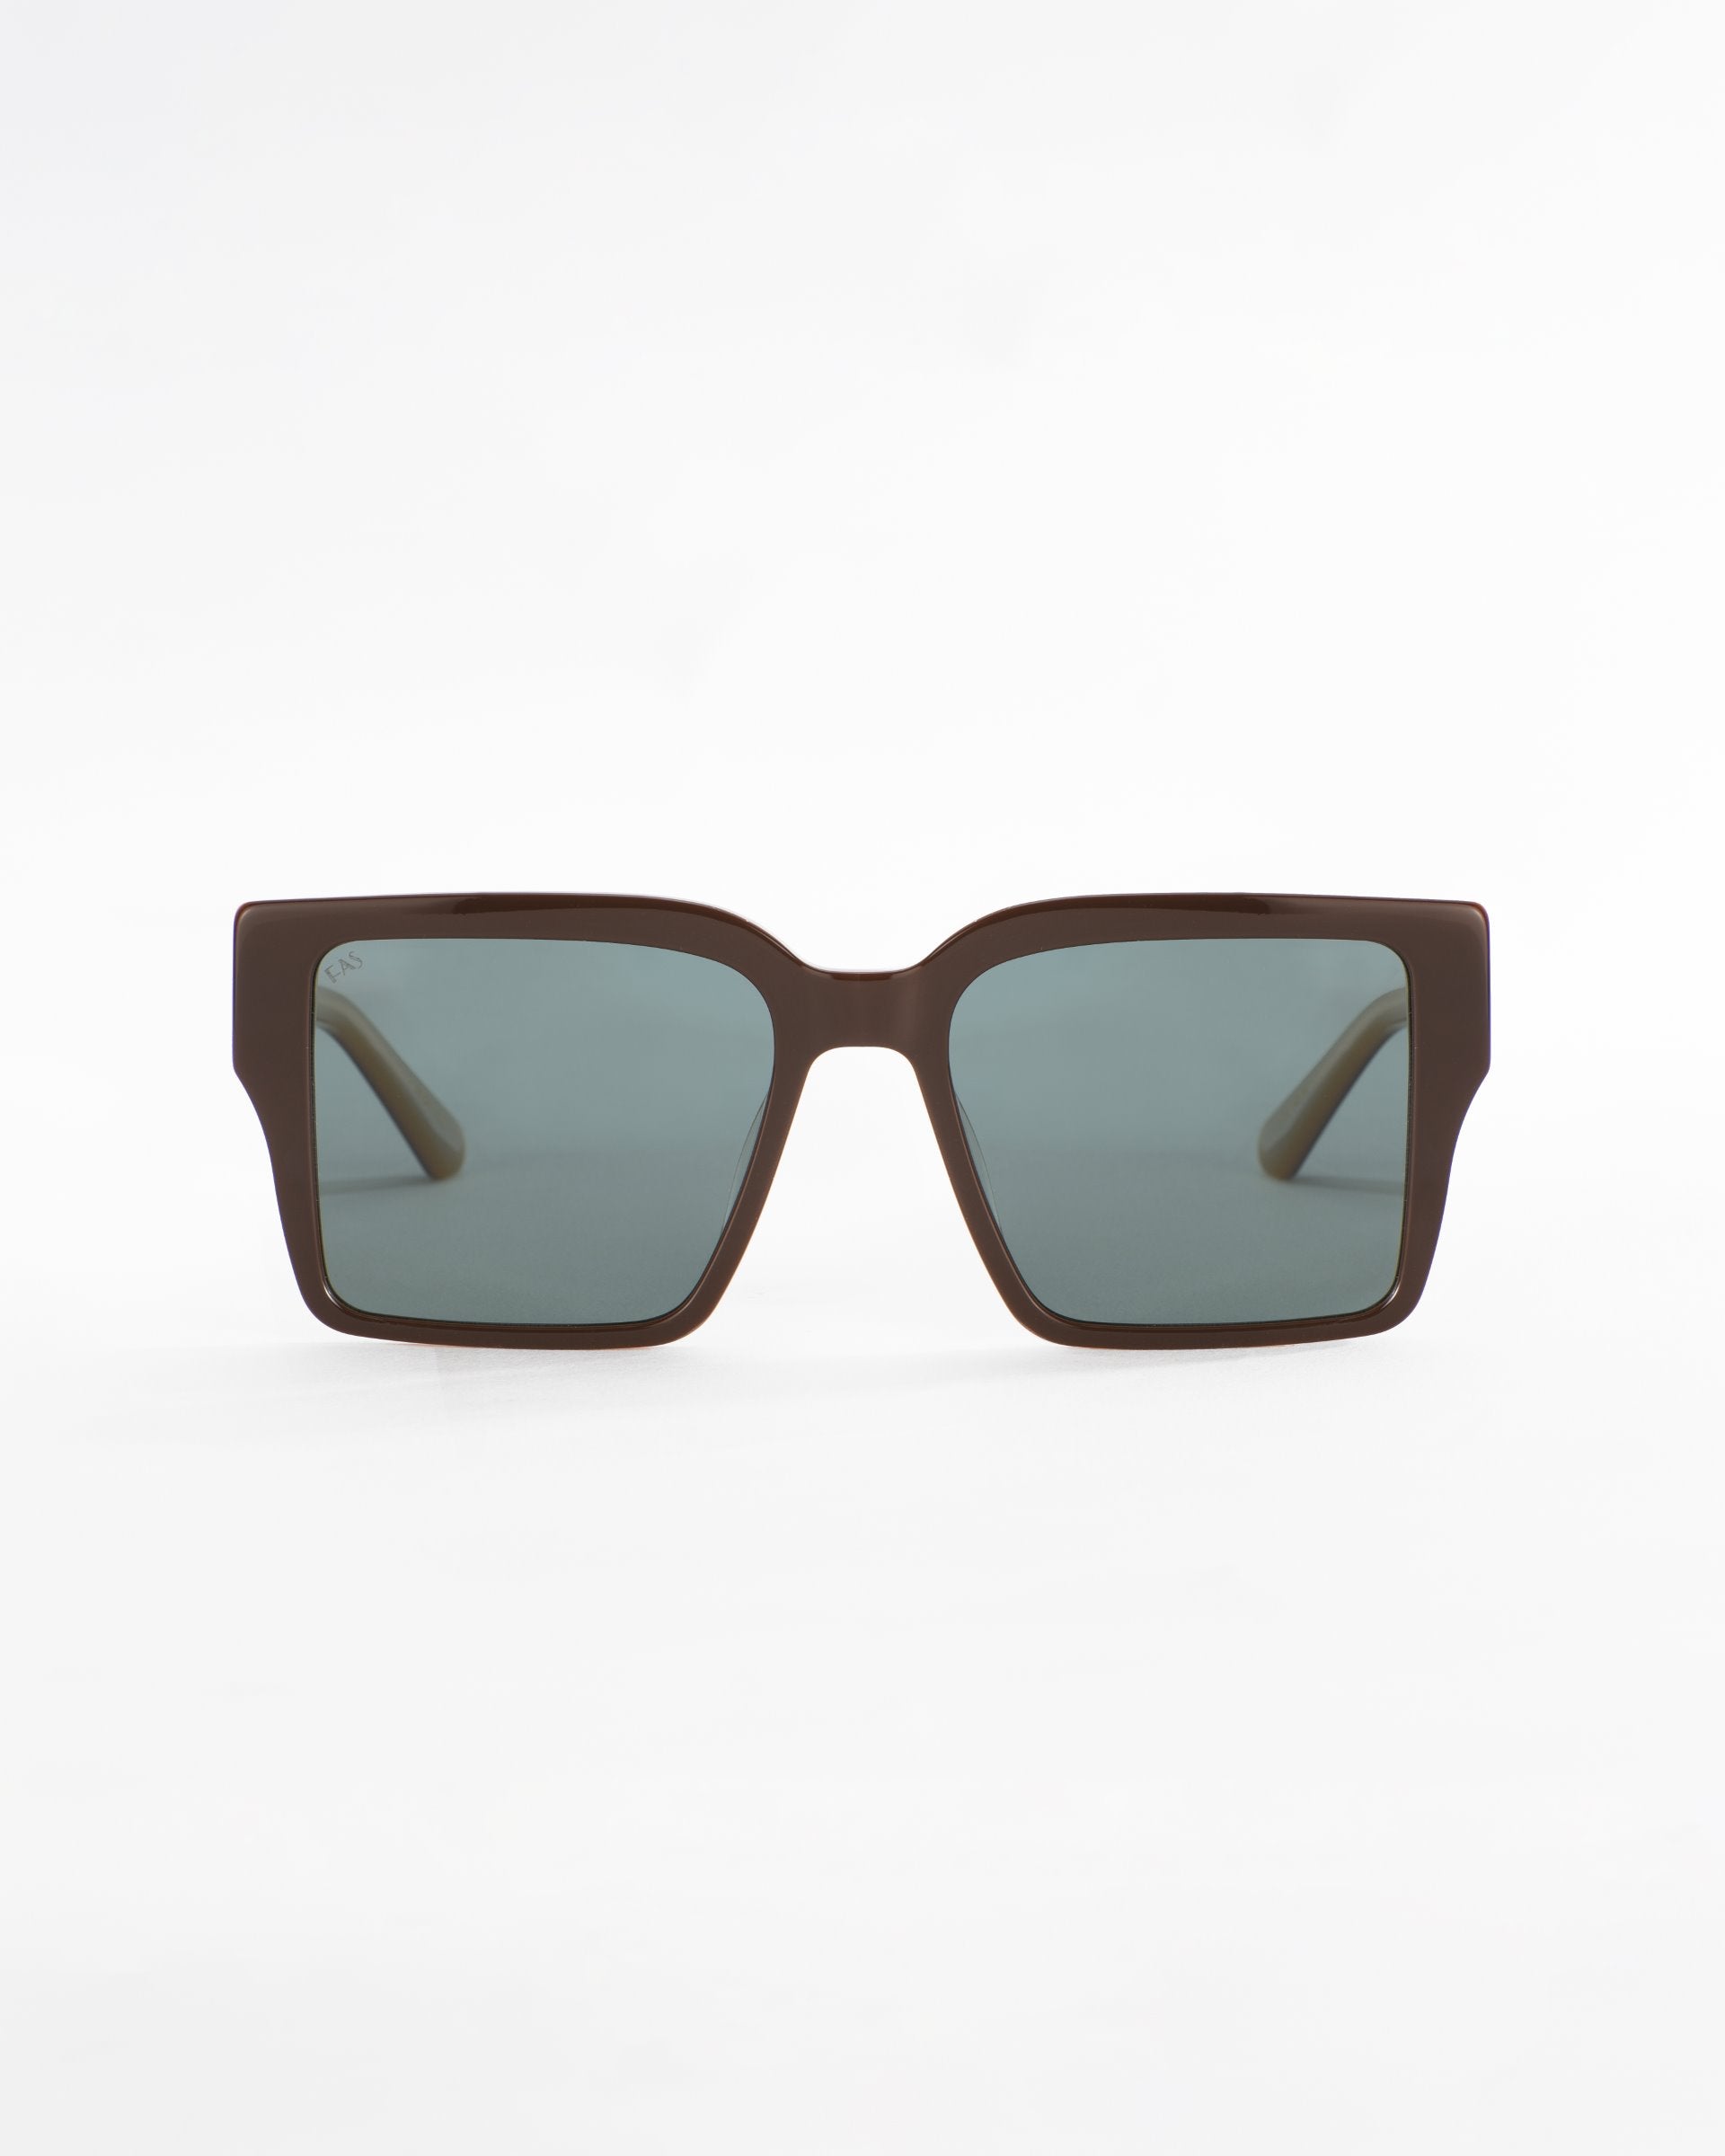 A pair of dark brown, oversized square-framed For Art's Sake® Castle sunglasses with ultra-lightweight green-tinted lenses displayed against a plain white background. The design is modern and sleek, with wide arms for a bold look.